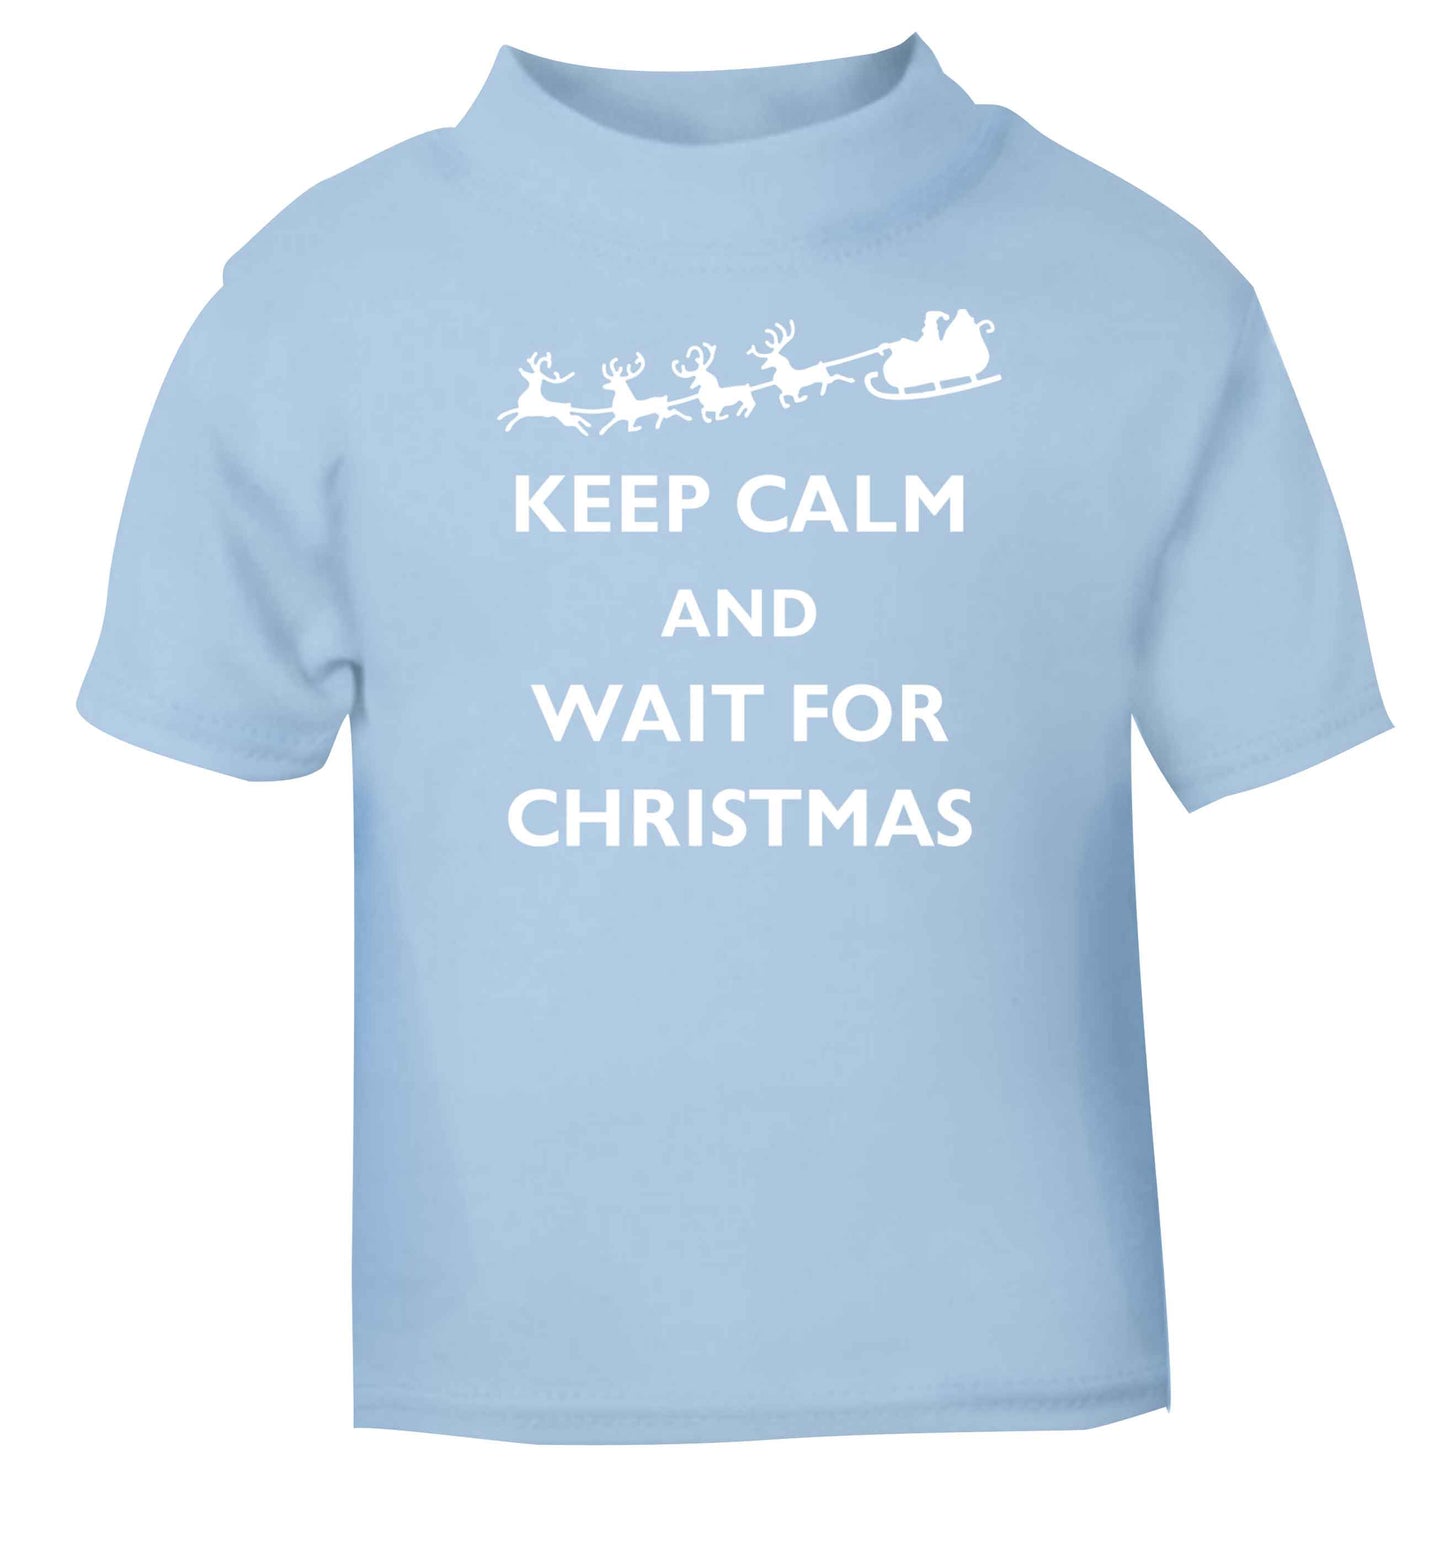 Keep calm and wait for Christmas light blue baby toddler Tshirt 2 Years